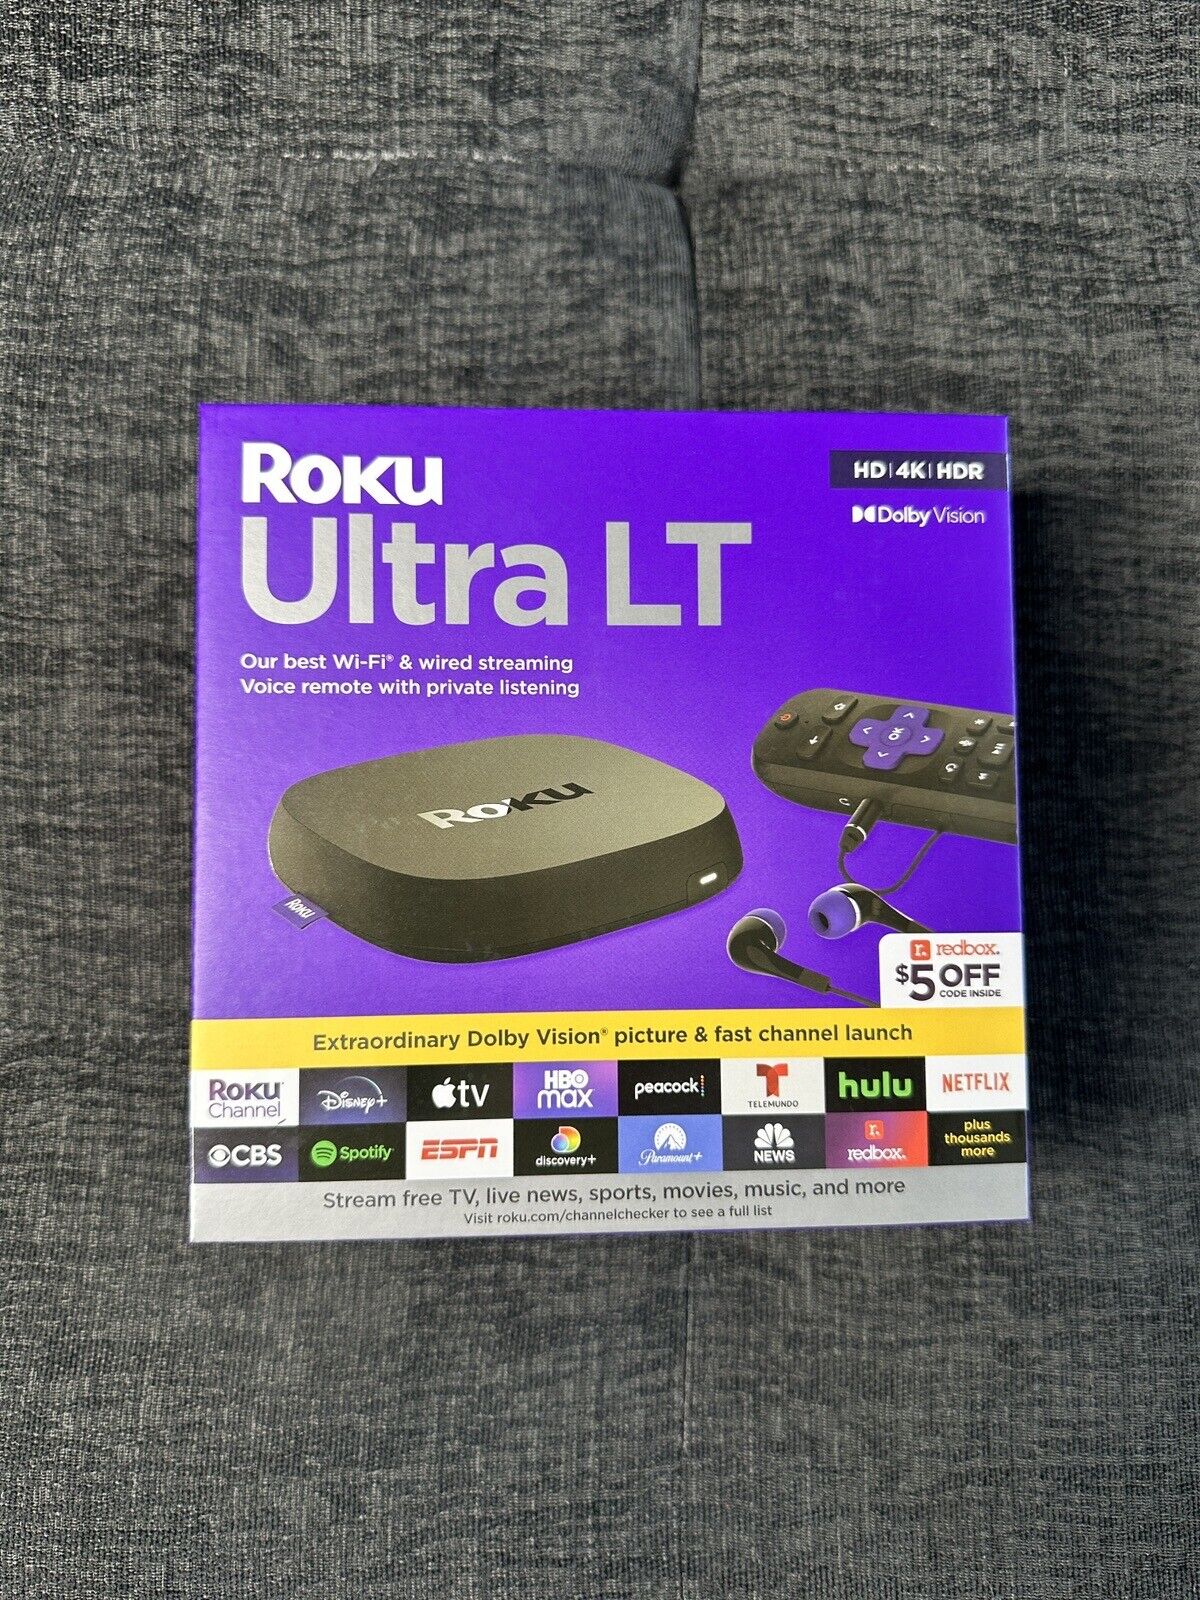 Roku Ultra Lt Streaming Device 4K/Hdr/Dolby Vision With Roku Voice Remote 2022